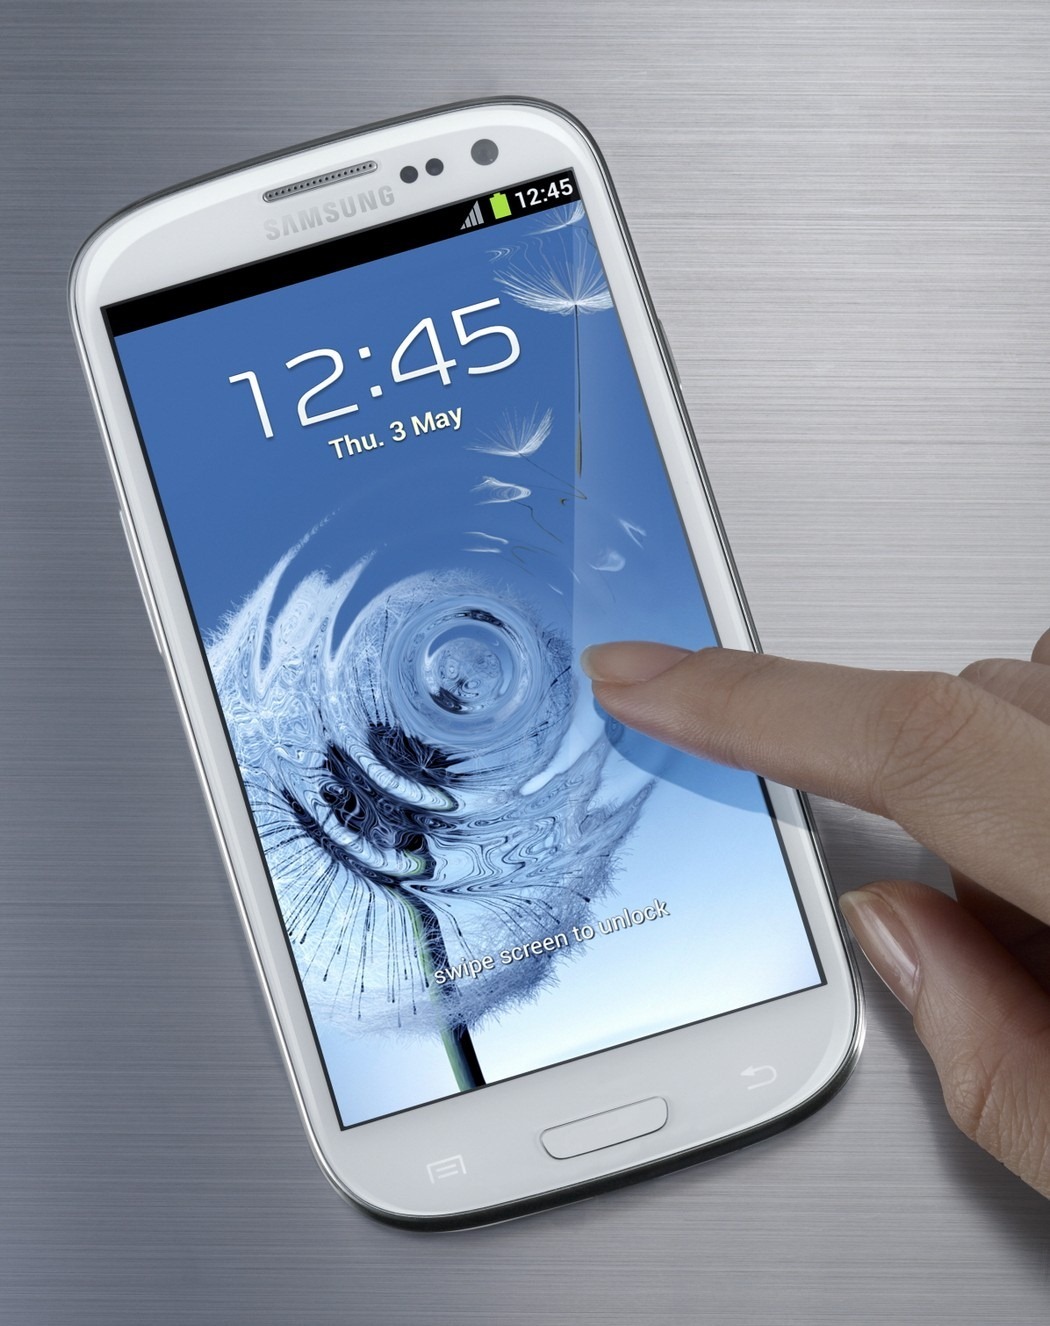 what video format is best for galaxy s3